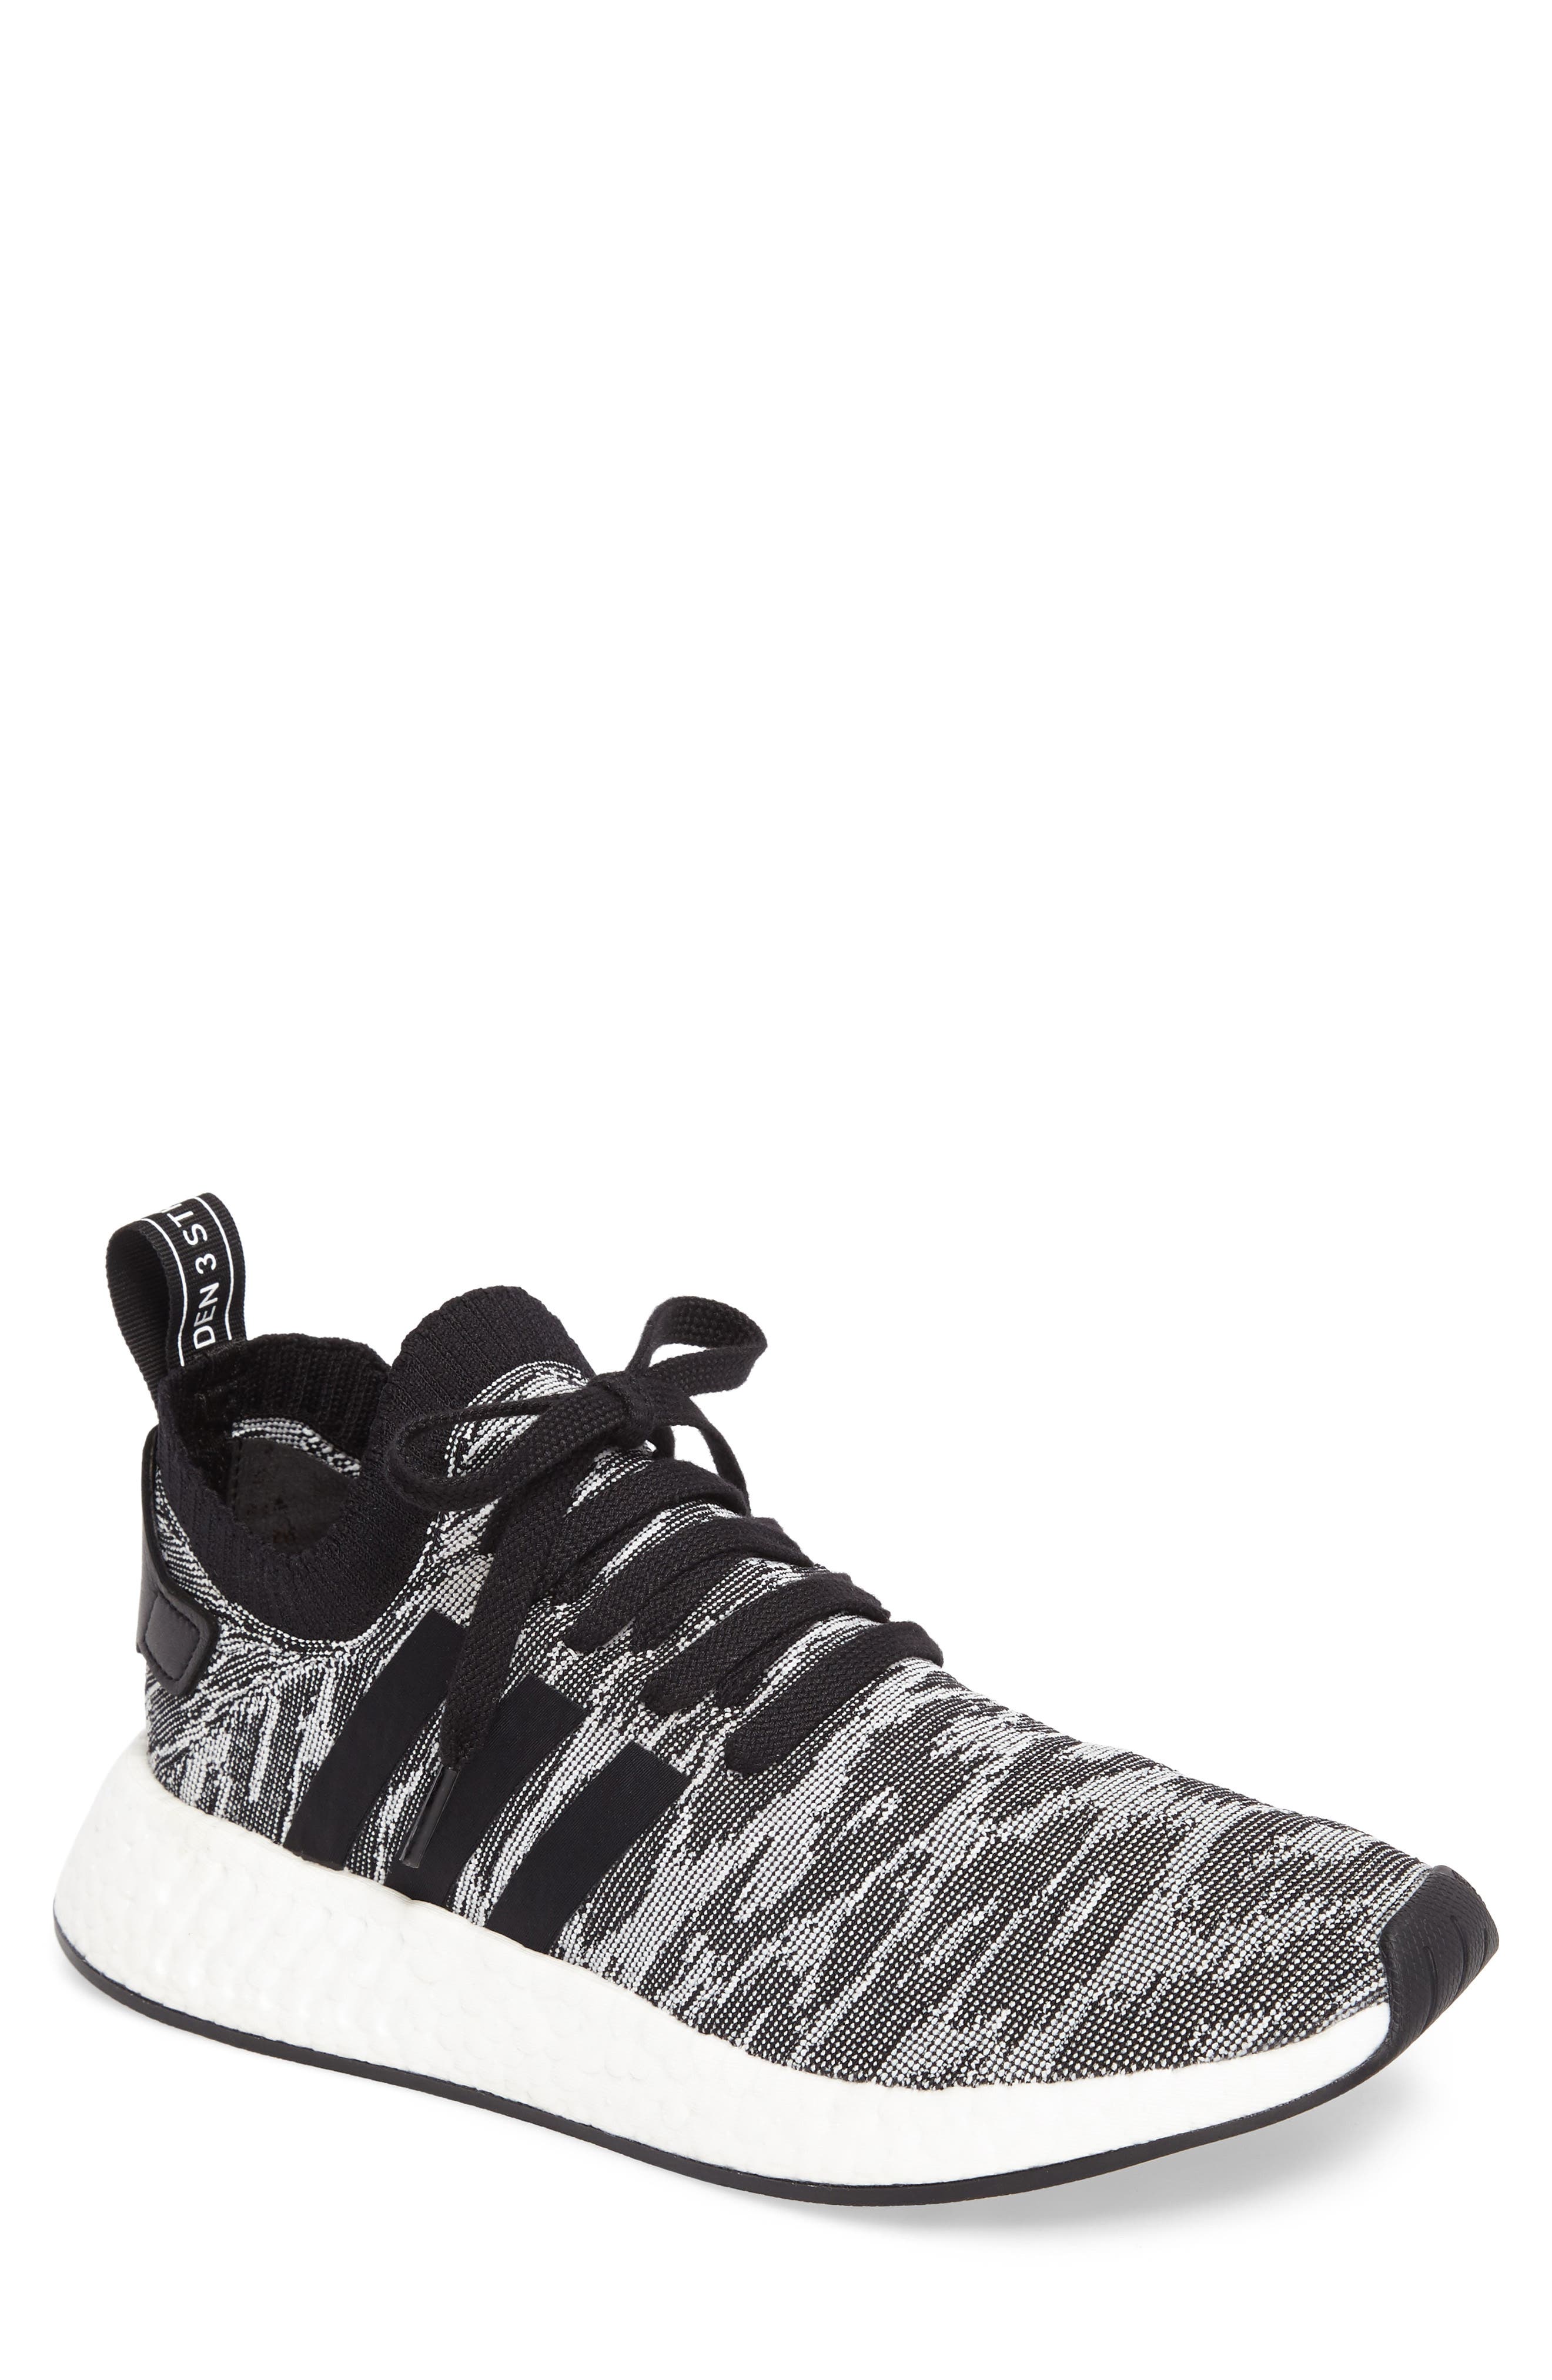 are adidas nmd r2 good for running